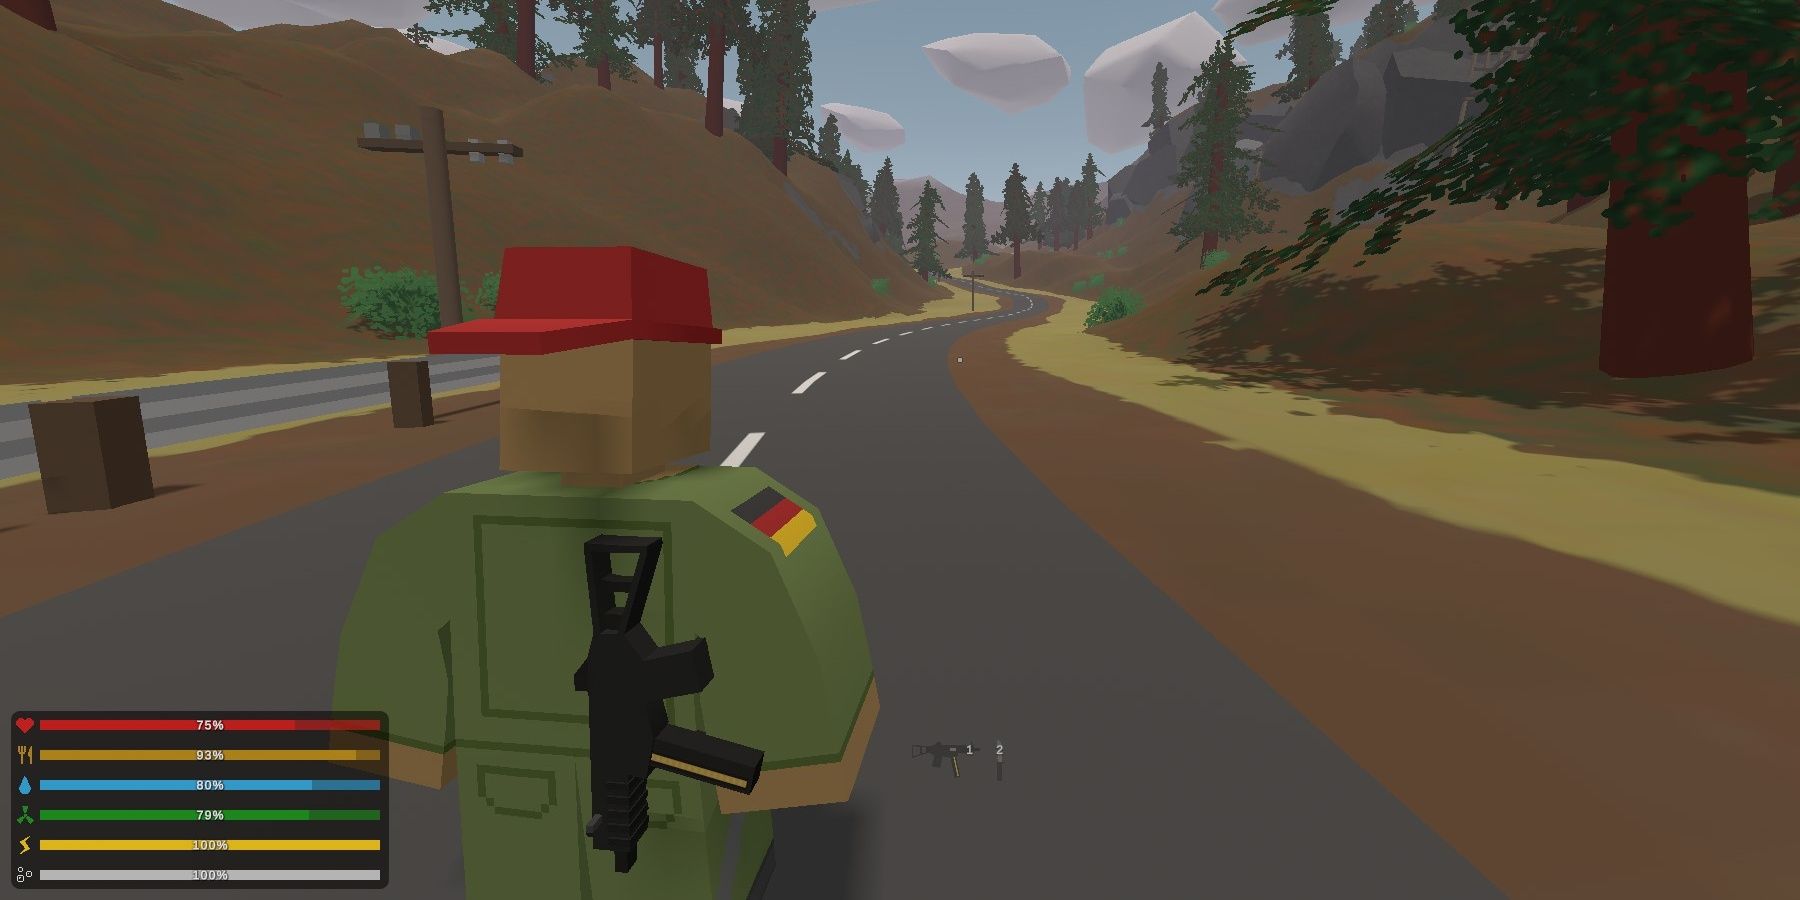 Unturned player looks down an empty road